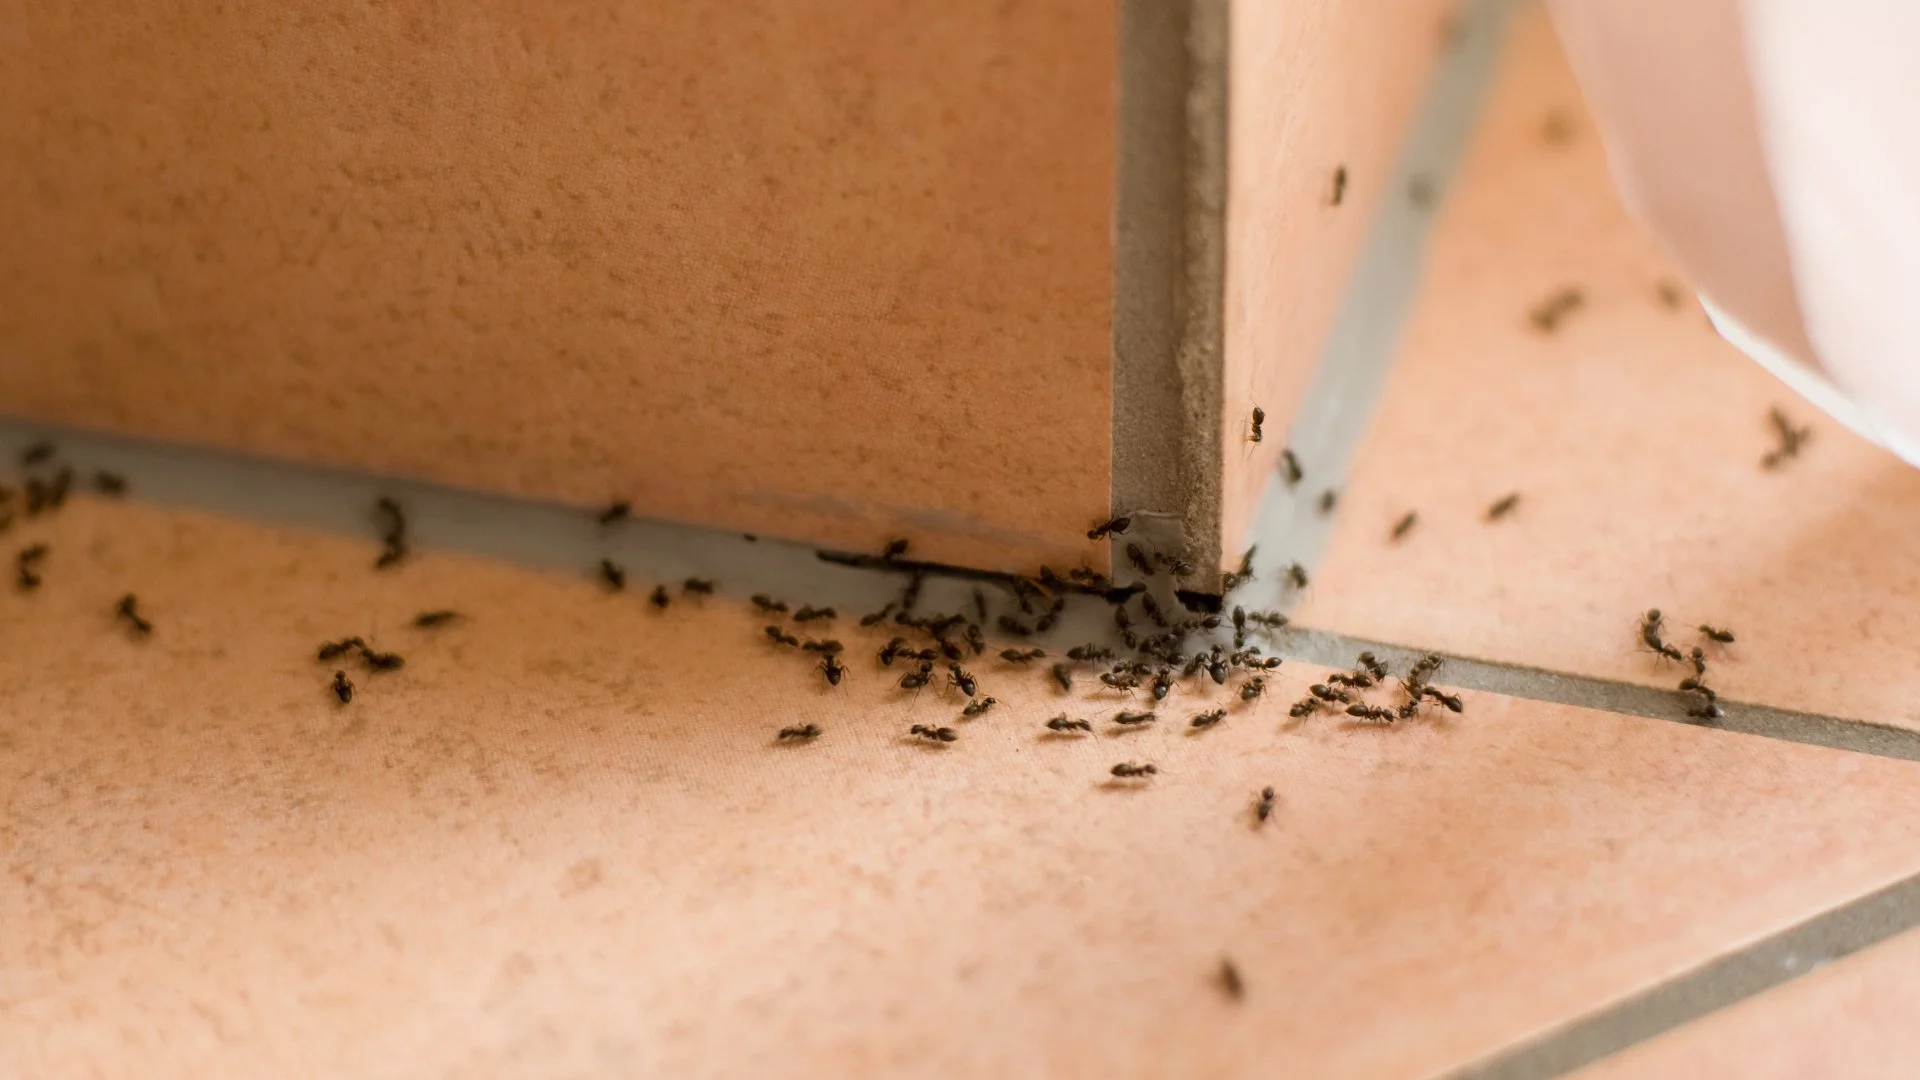 Indoor ant festation at a home in Westminster, MD.